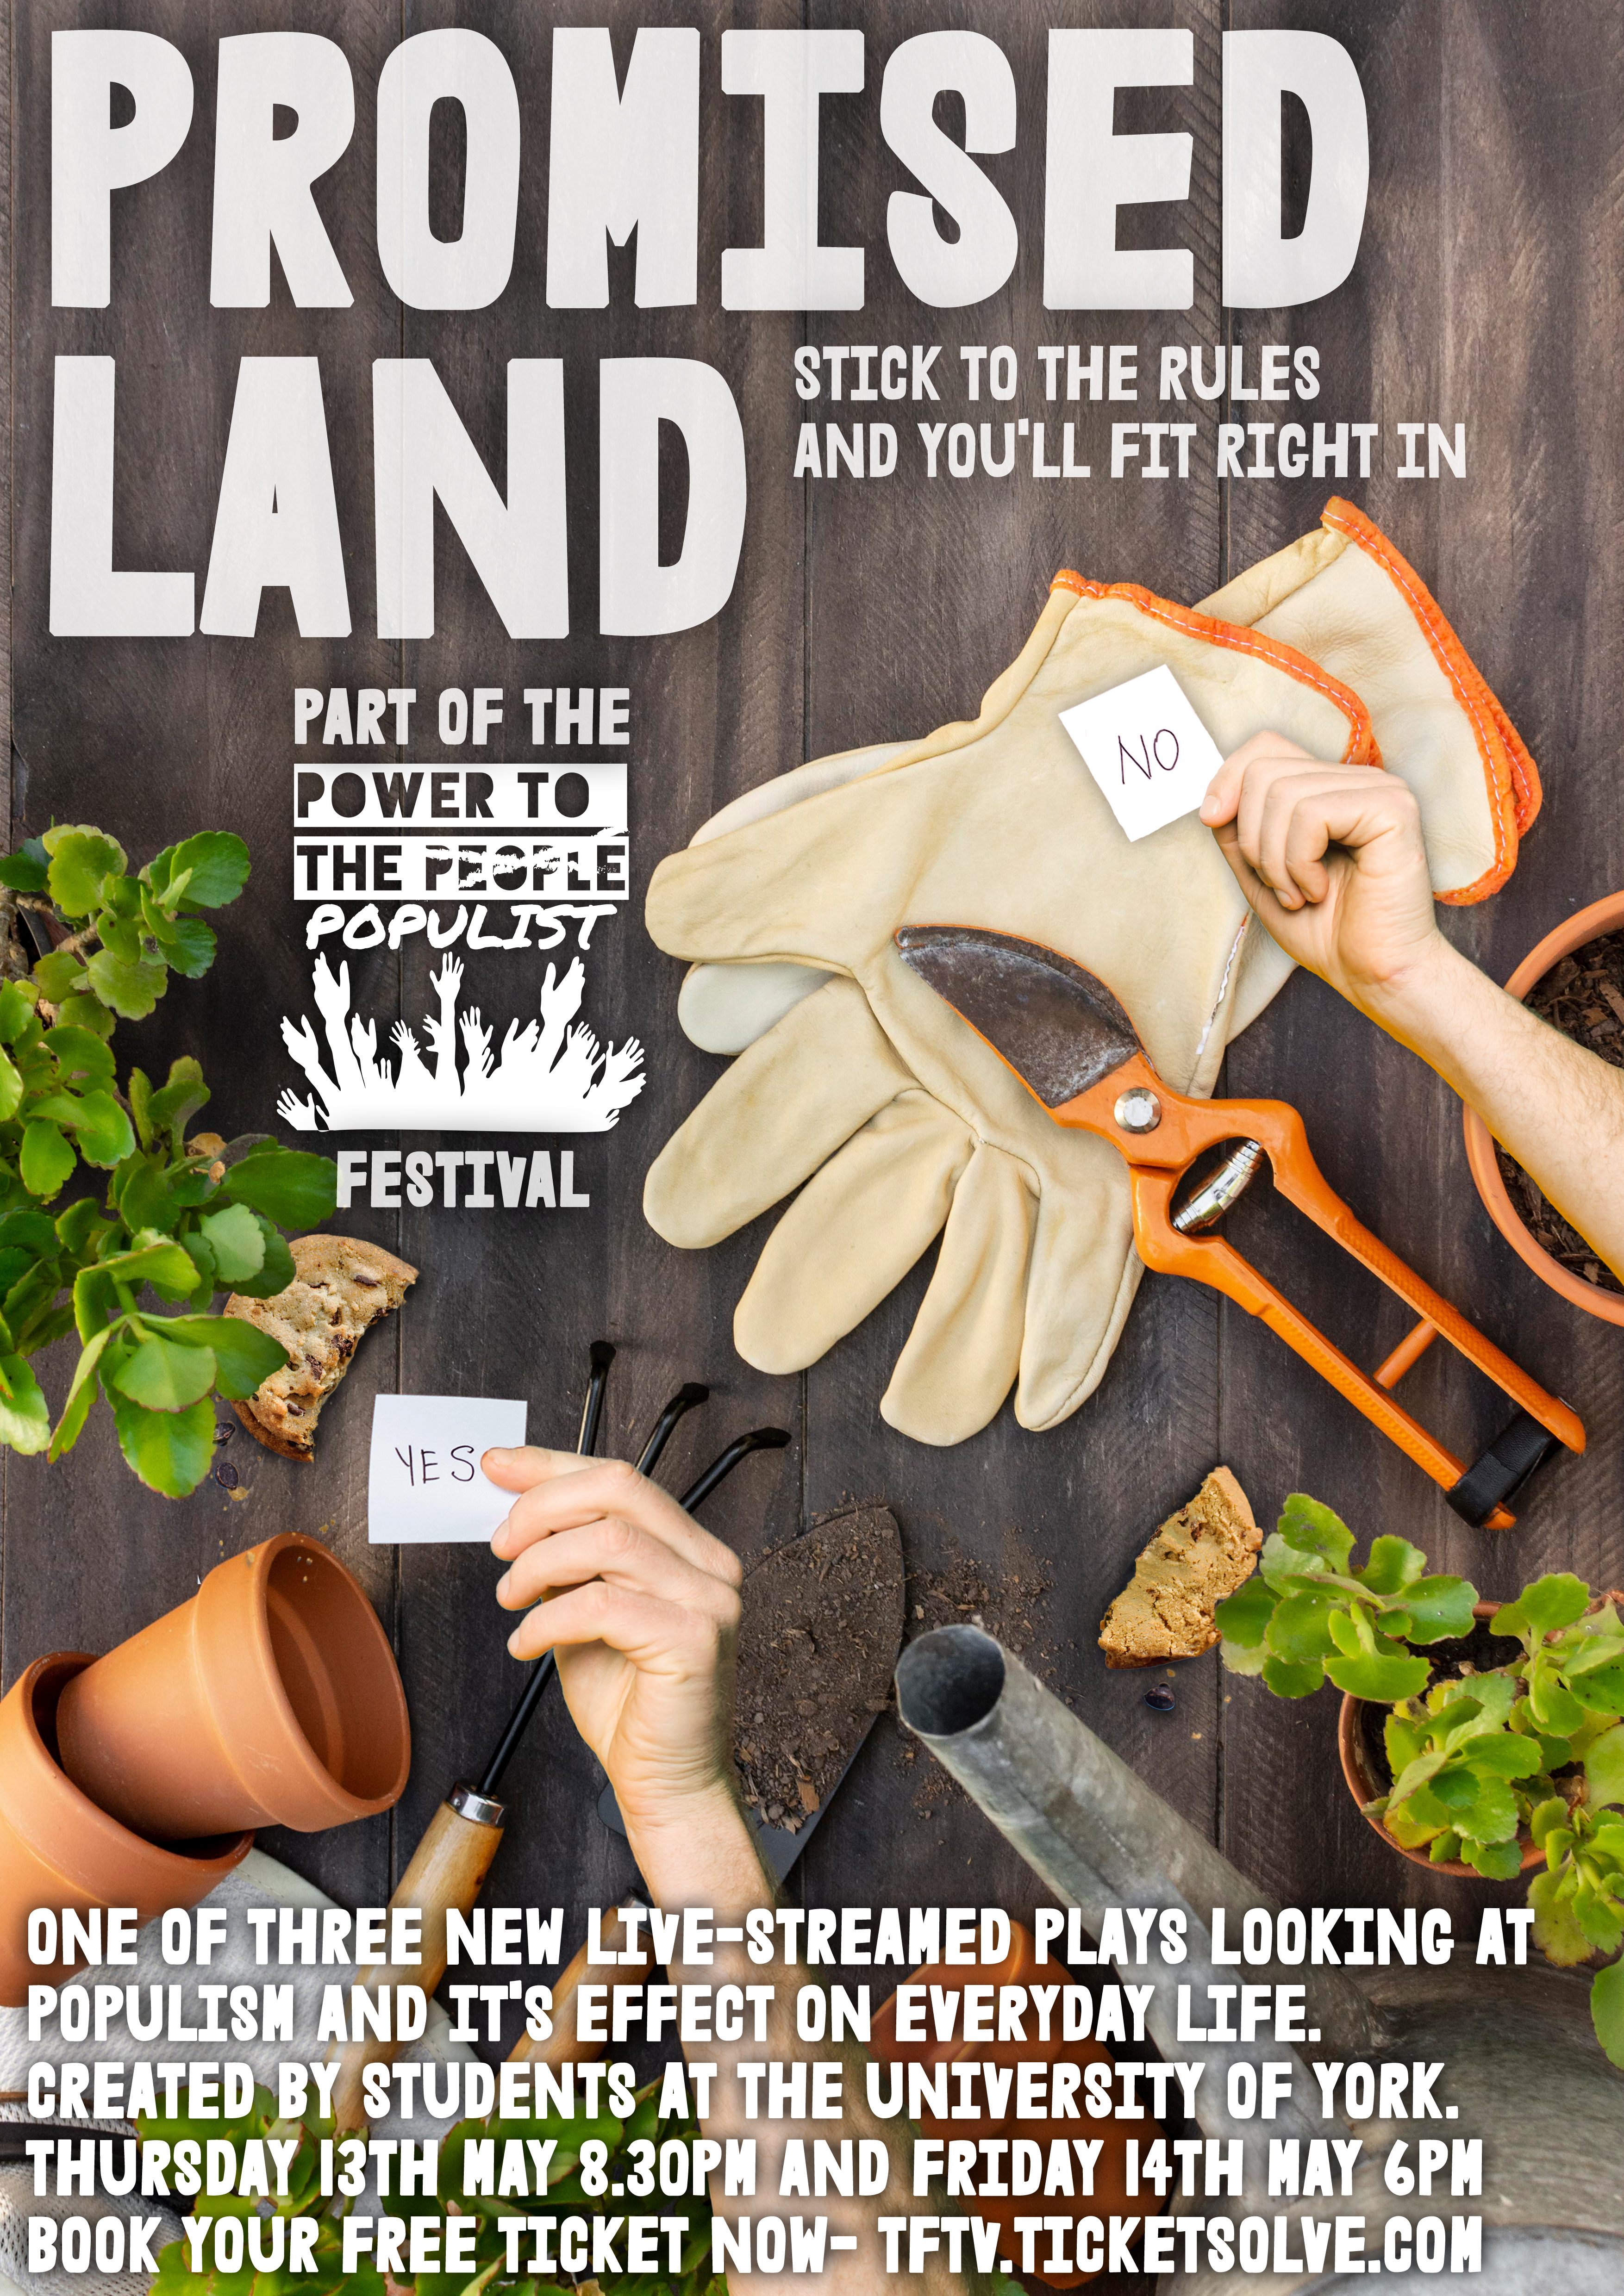 Gardening equipment, plants and broken biscuits lay on a wooden table. the title 'Promised Land' is in the top left corner in white. In the top right corner over a pair of gardening gloves, a hand holds a piece of paper that says 'No' while near the bottom left a hand holds a piece of paper that says 'Yes'.